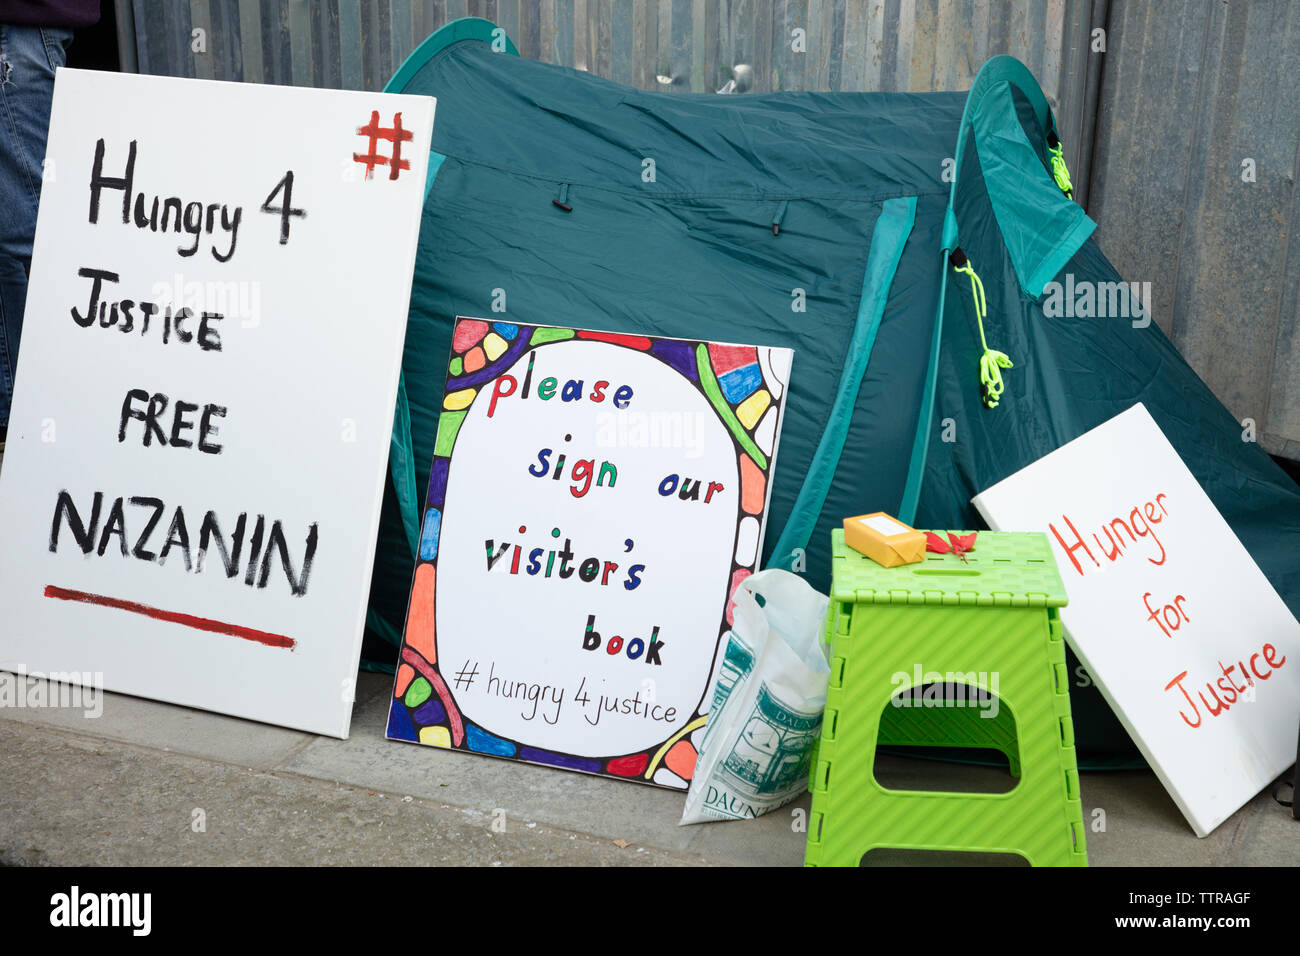 London, UK. 17th June 2019. Tent and placards in support of Richard Ratcliffe on hunger strike in front of the Iranian embassy in London in protest of the detention of his wife Nazanin Zaghari in Iran over spying allegations. Credit: Joe Kuis / Alamy Stock Photo